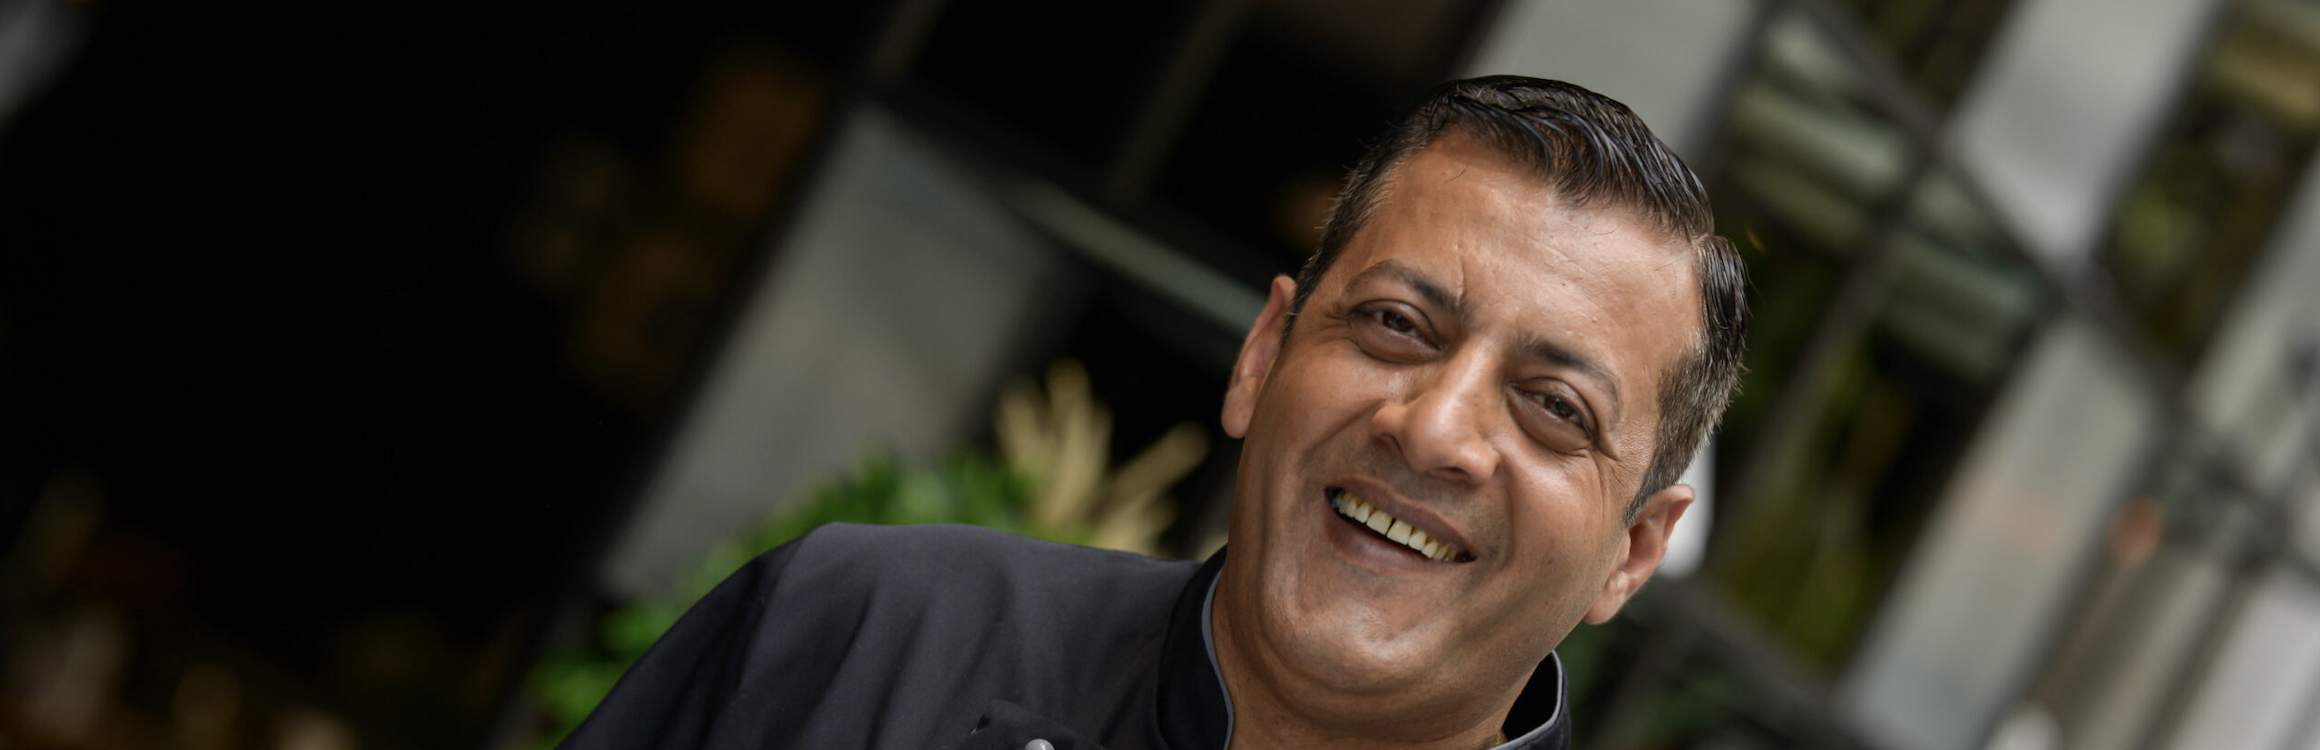 manvir singh-  executive chef smiling with hand on heart 